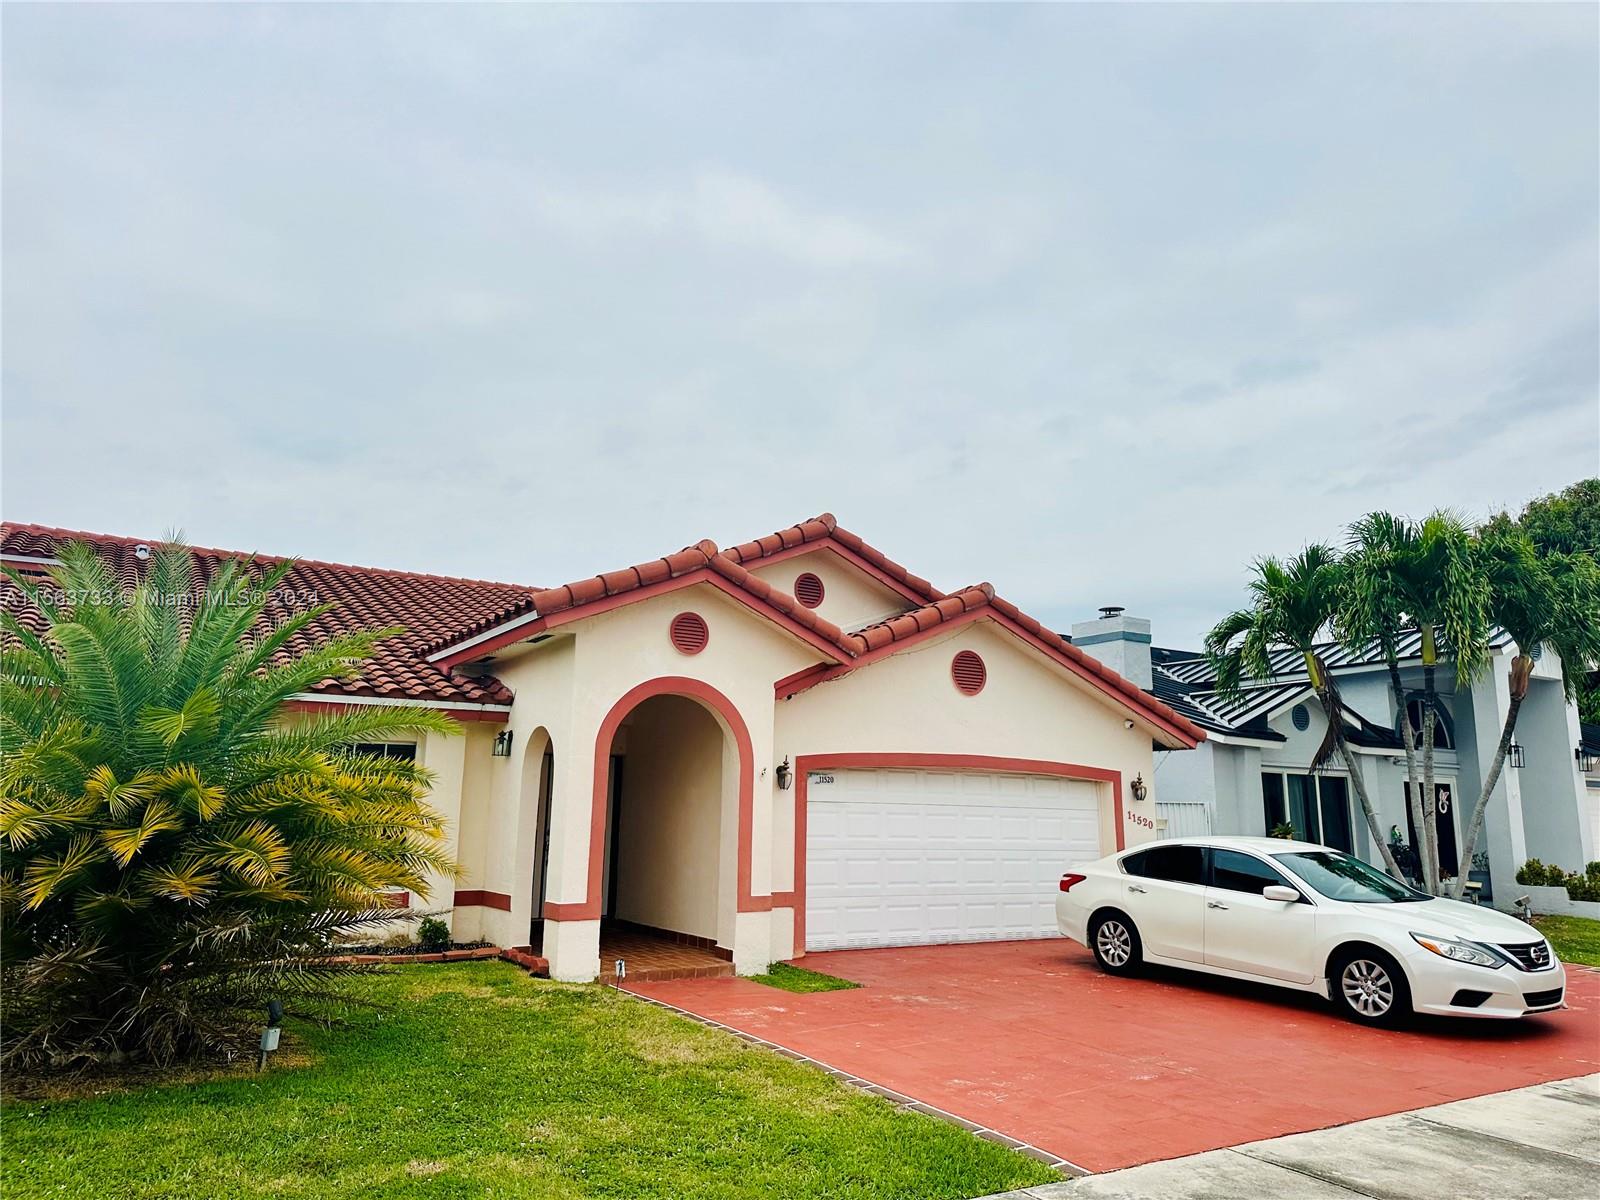 11520 SW 143rd Ct, Miami, Florida 33186, 4 Bedrooms Bedrooms, ,3 BathroomsBathrooms,Residential,For Sale,11520 SW 143rd Ct,A11563733